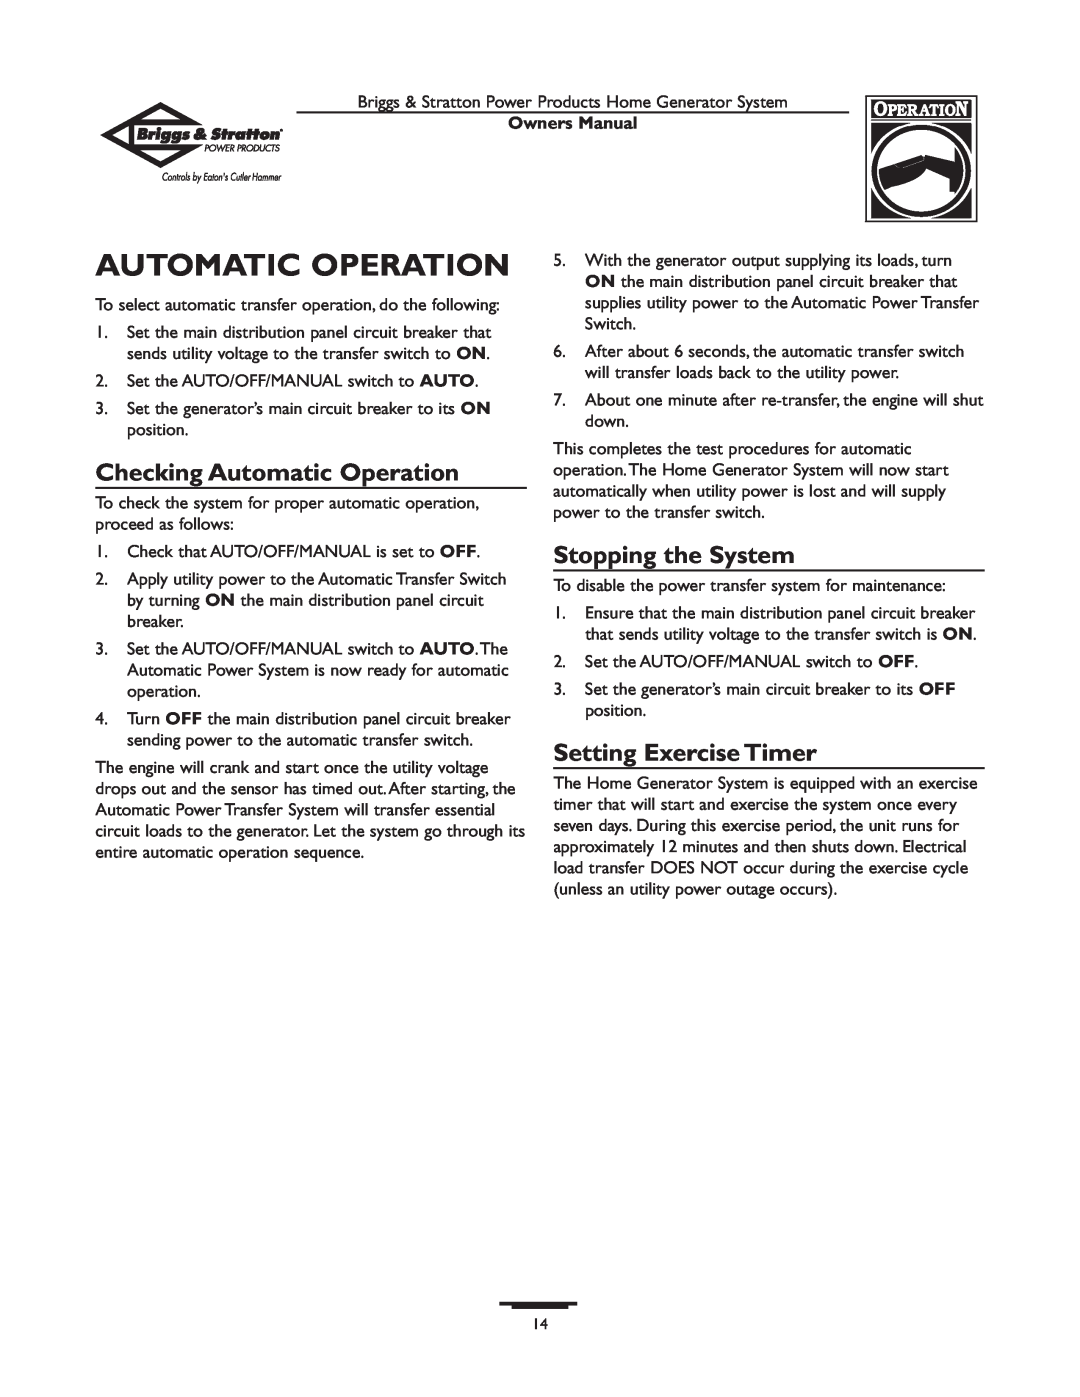 Briggs & Stratton 1679-0 Checking Automatic Operation, Stopping the System, Setting Exercise Timer, Owners Manual 